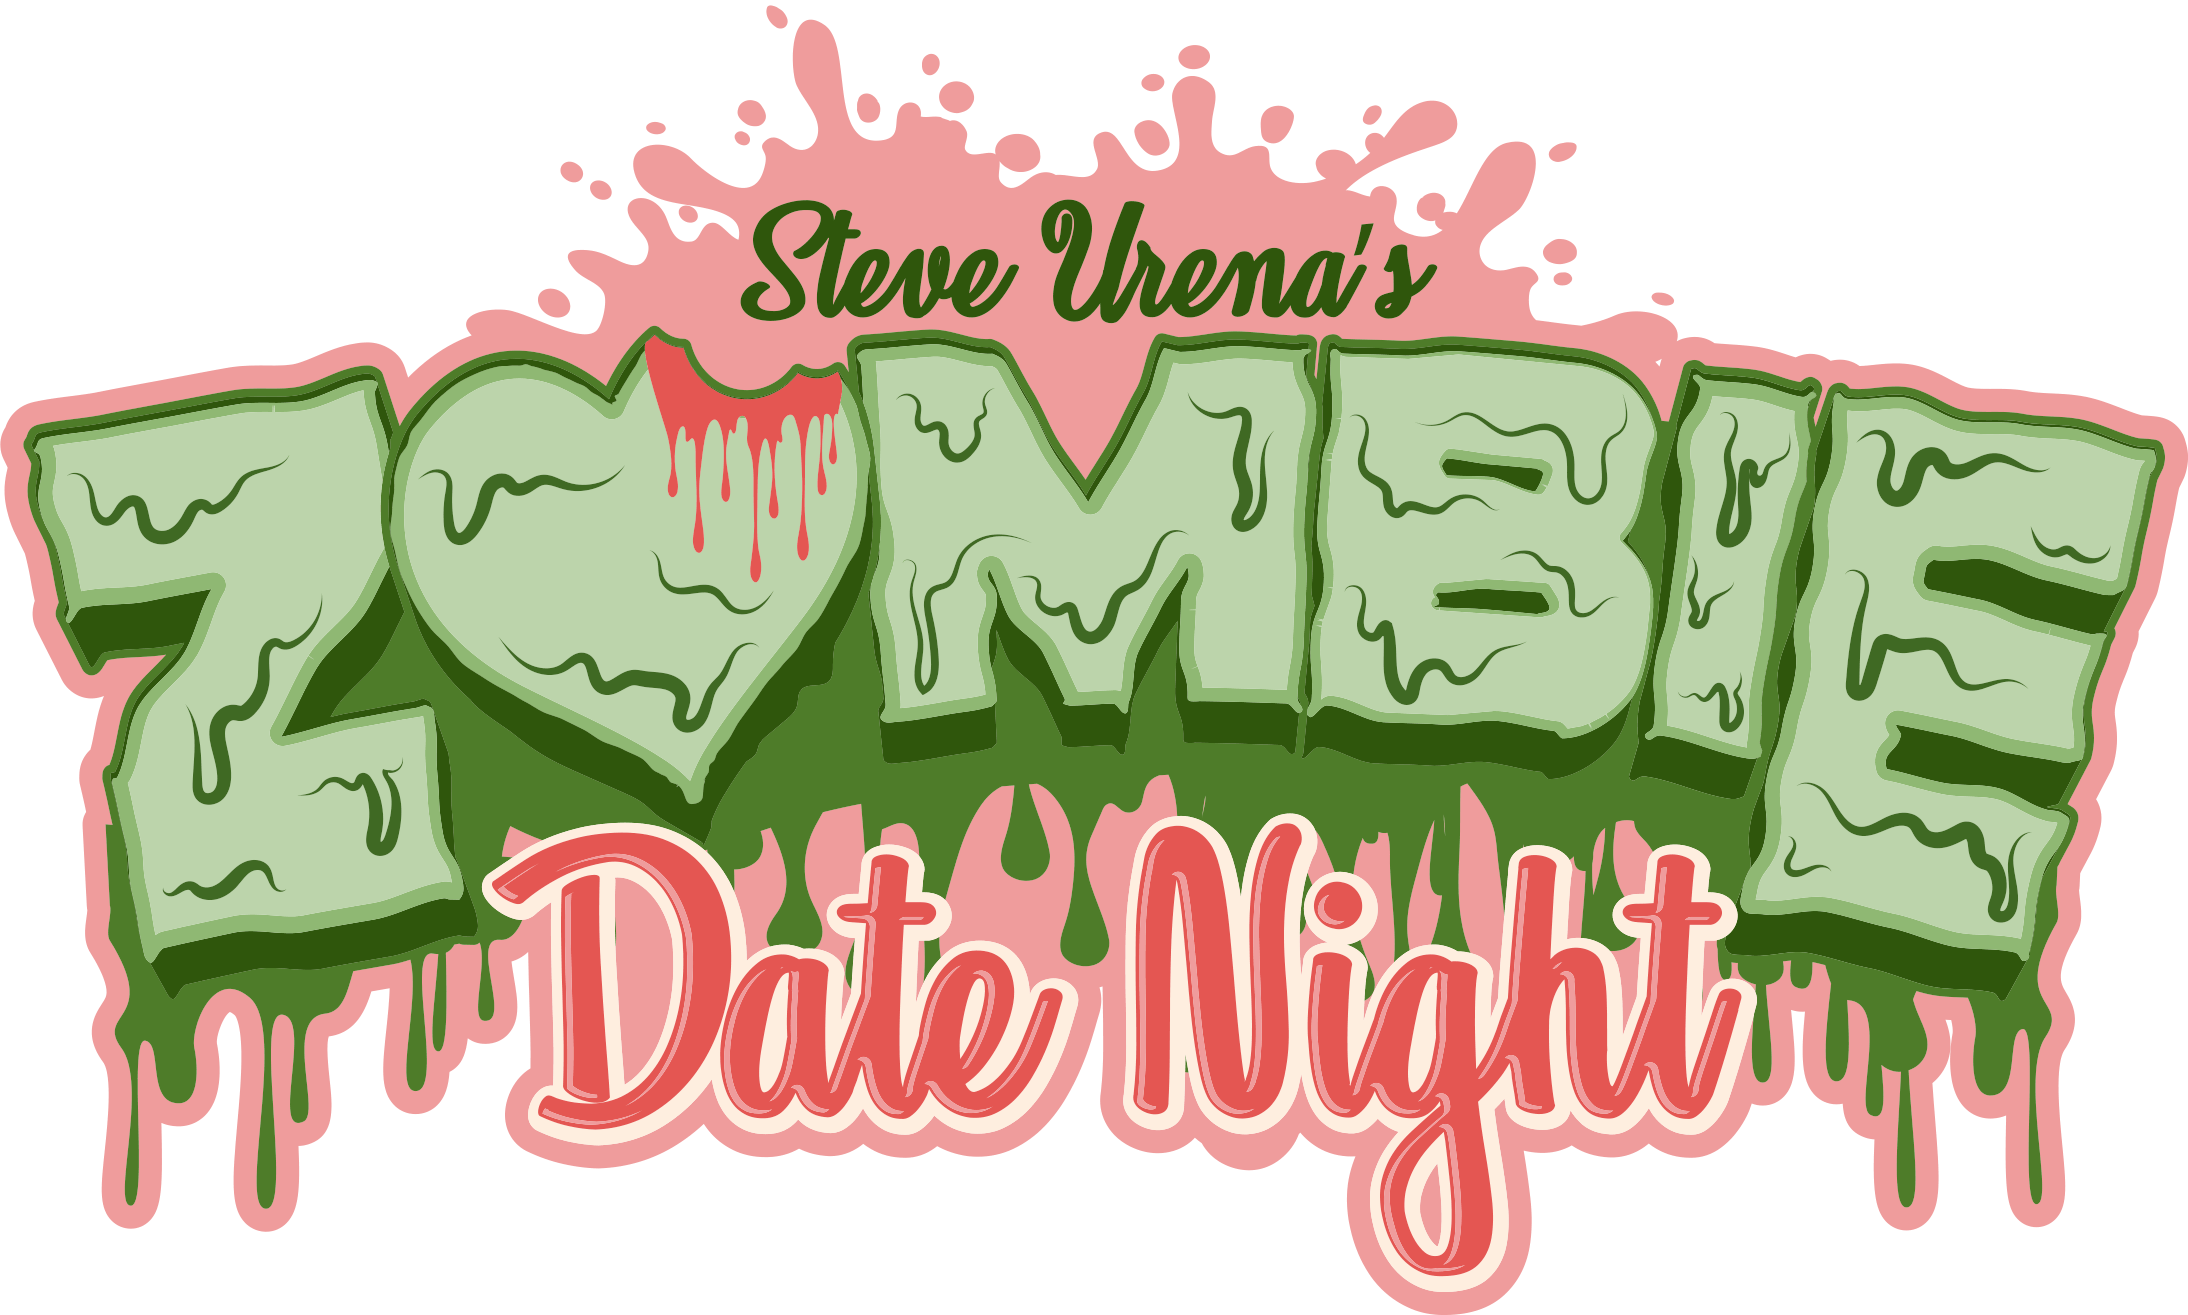 The logo for Zombie Date Night